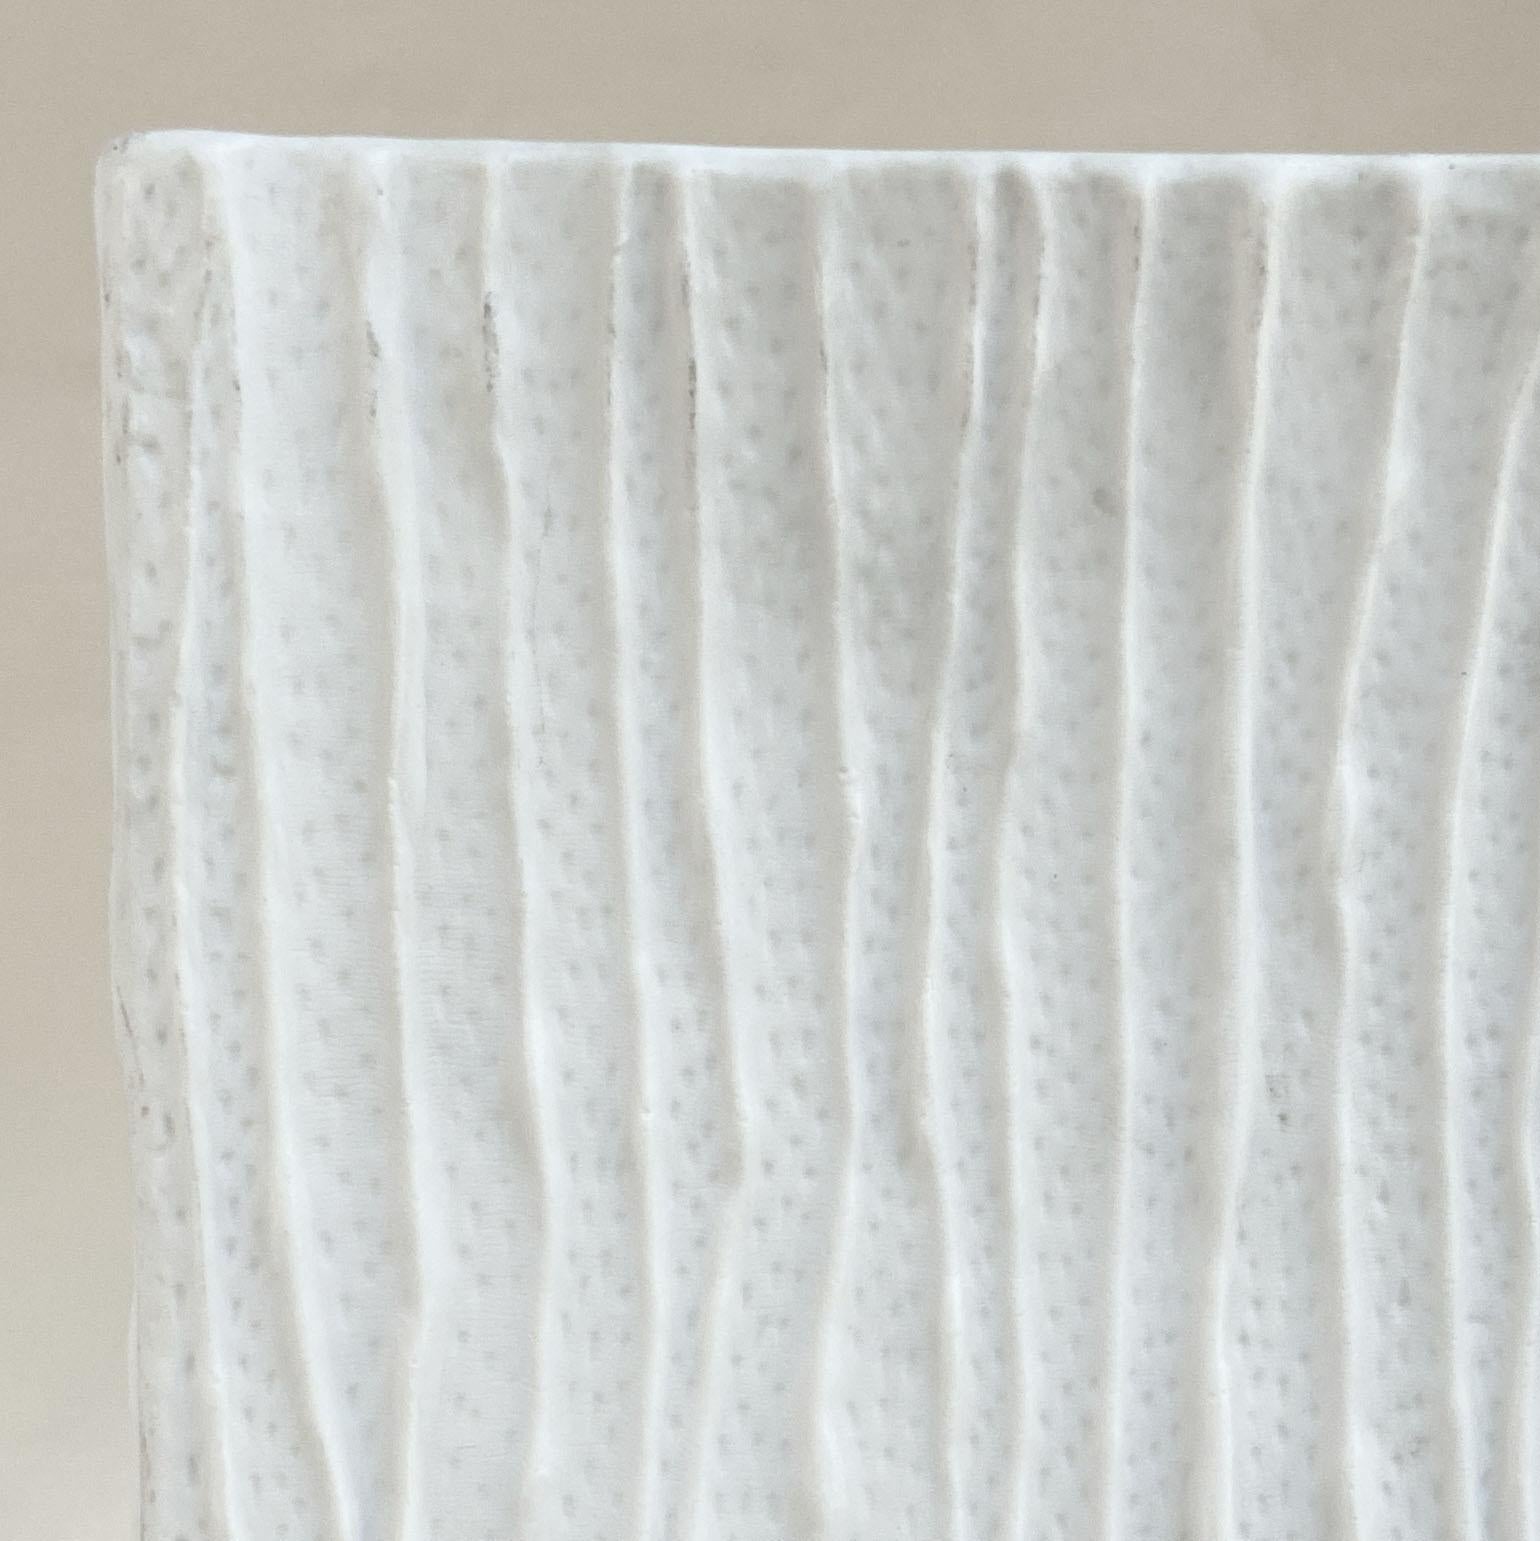 Mid-20th Century Pair of Large White Square Relief Vases by Hutschenreuther For Sale